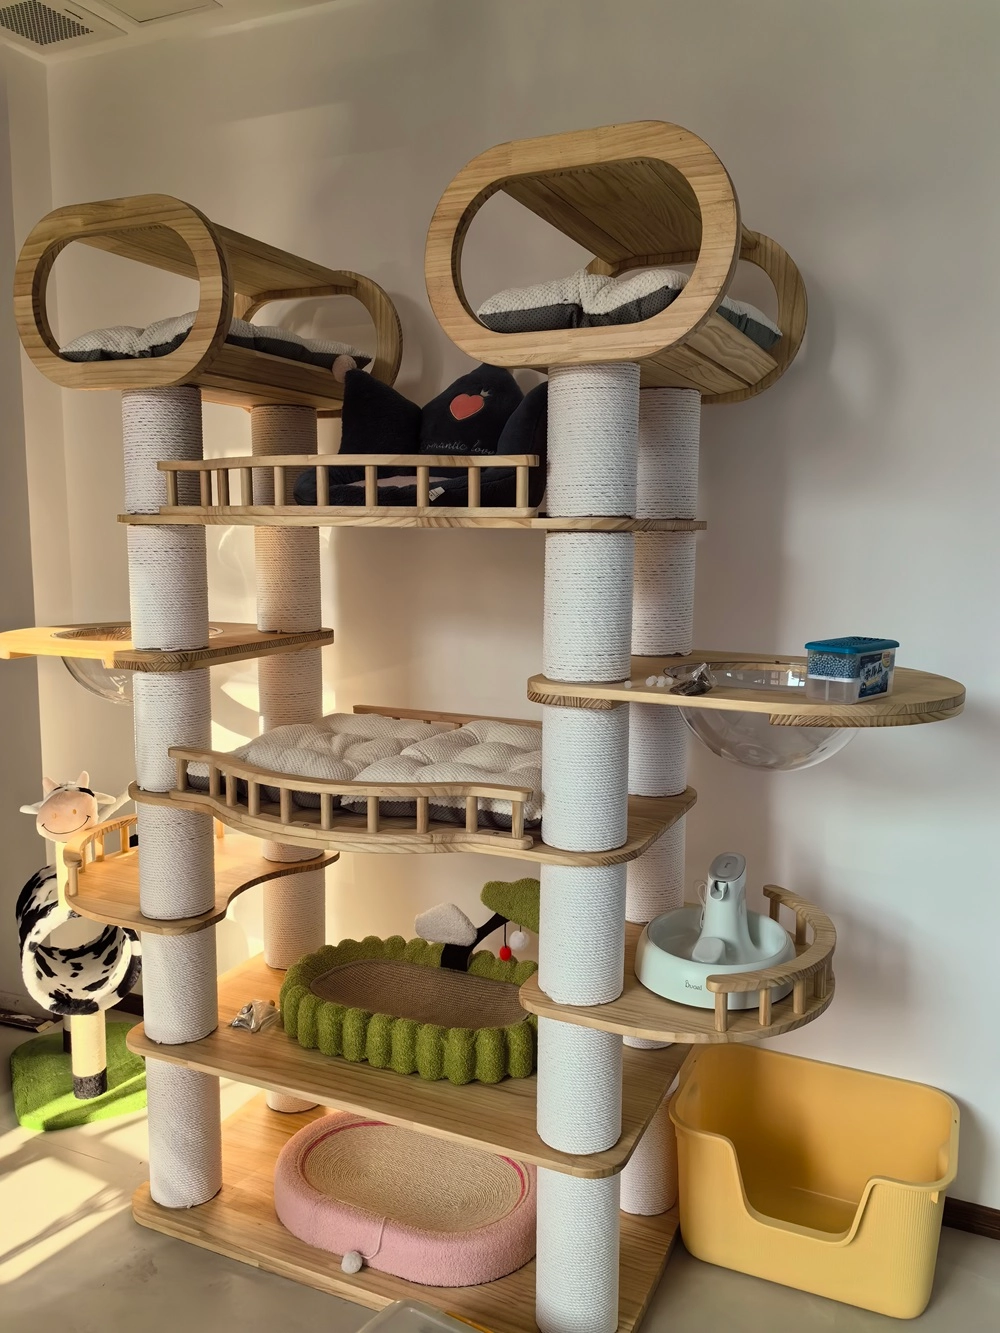 The largest wooden cat tree for multi-cat household